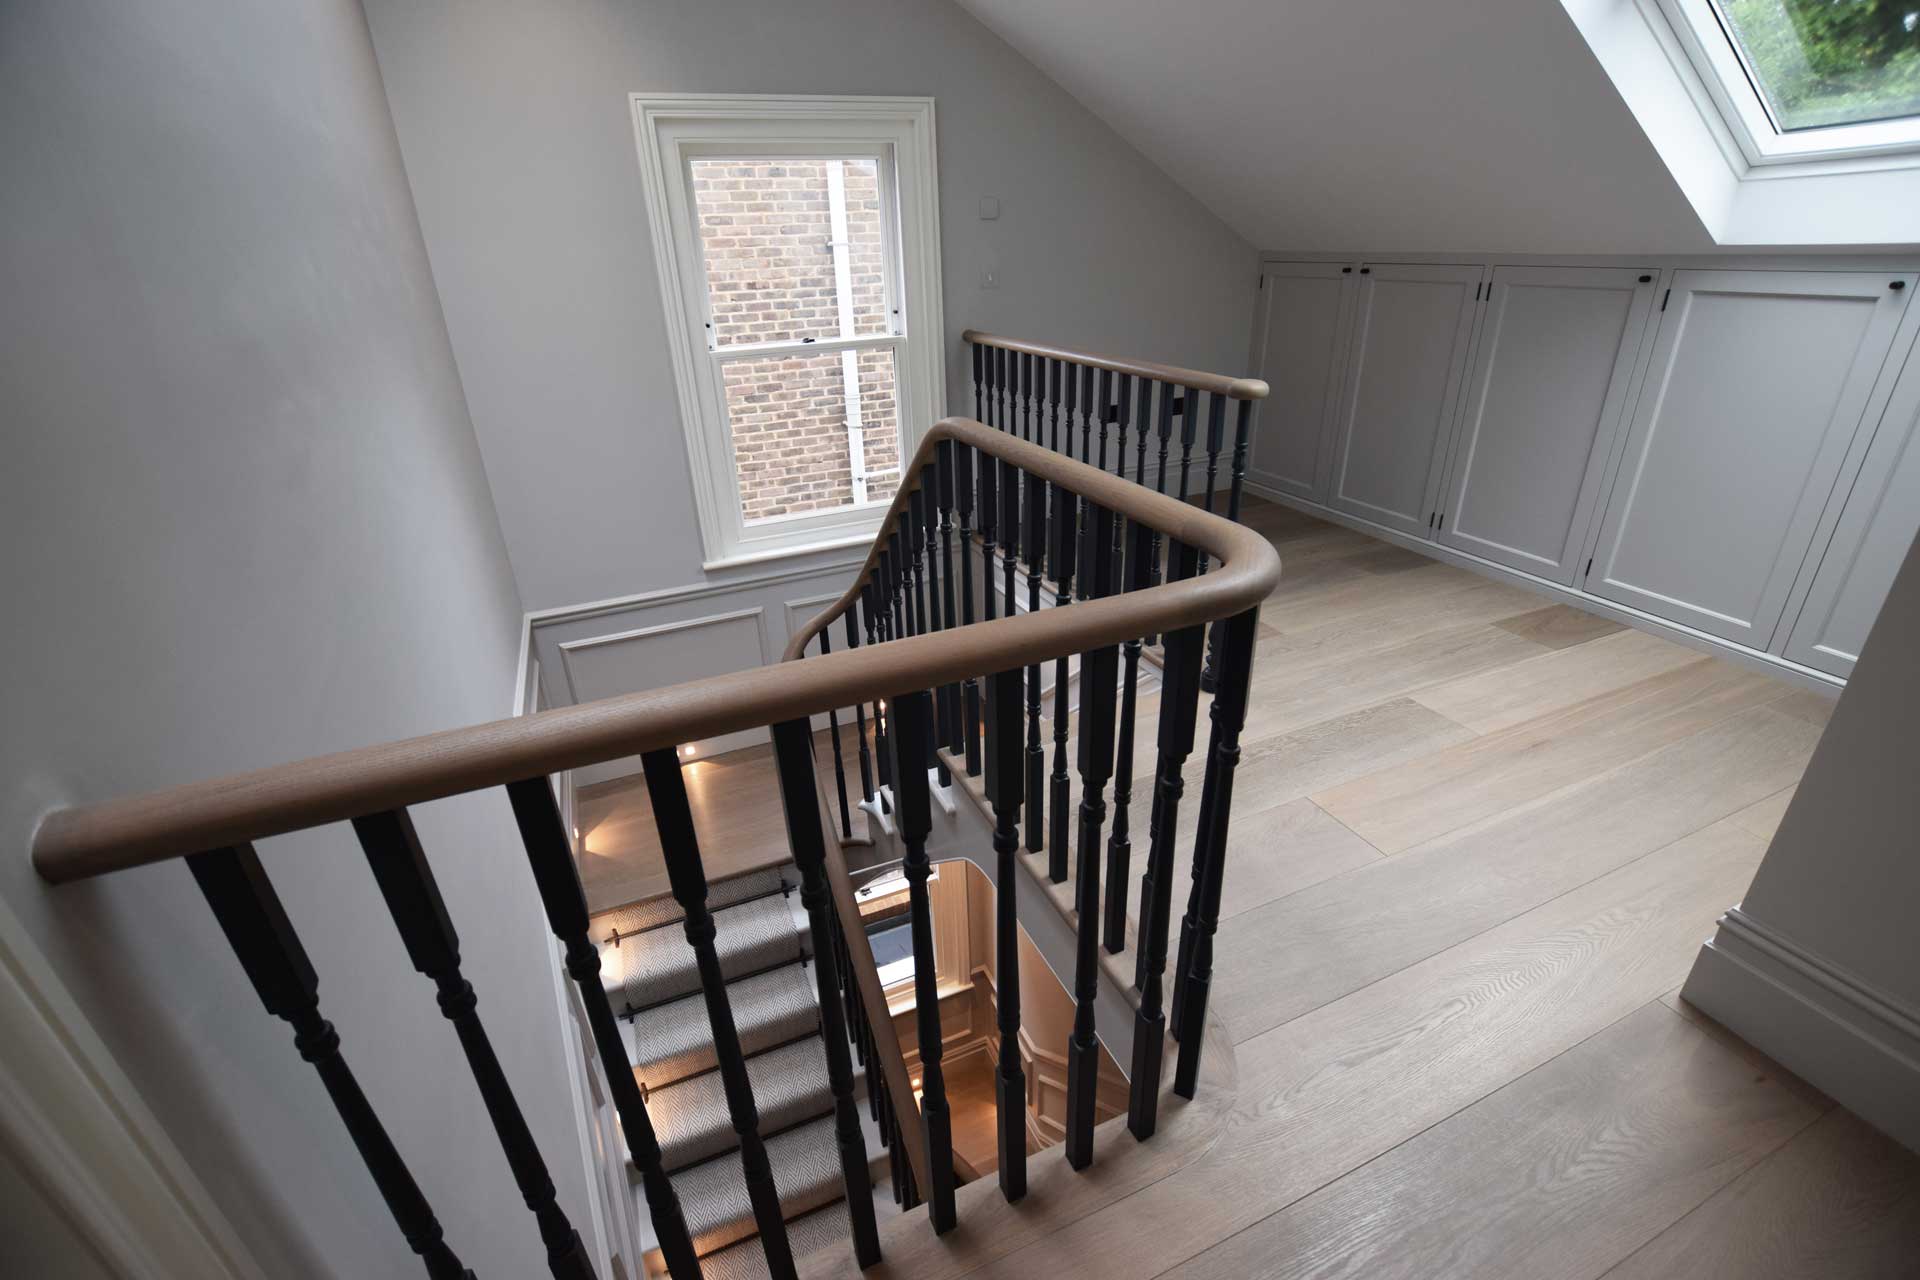 Clapham Common Westside Wandsworth Whole House Refurbishment, Extension And New Basement 10